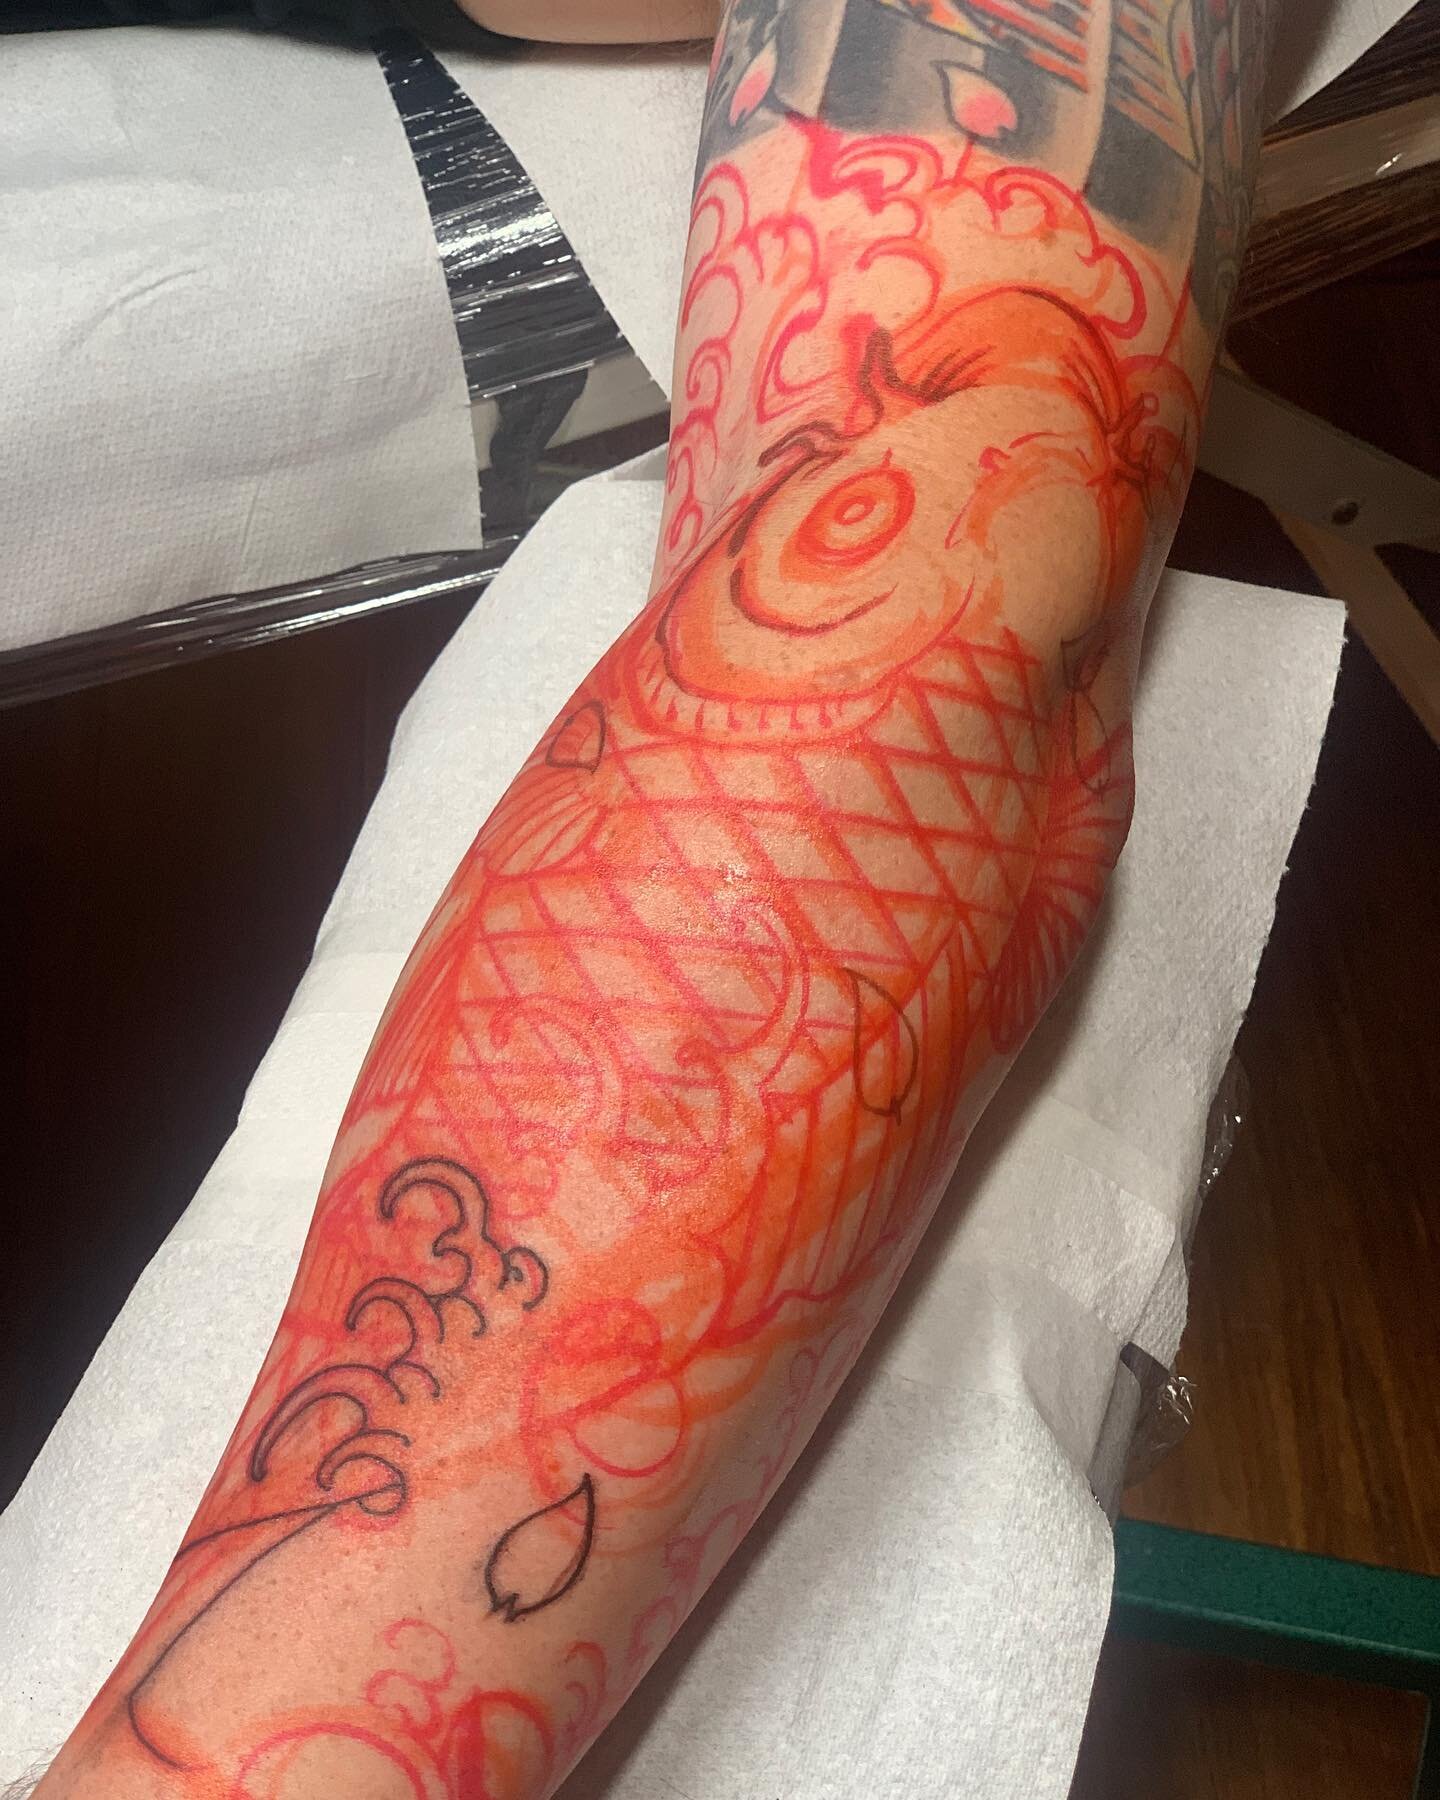 More koi! Finished the top of Dave&rsquo;s arm around 2011. Started the lower part today. Cheers Dave! @modernclassictattoo #modernclassictattoo #irezumi #tattoo #japanesetattoo #stewartrobson #stewartrobsontattoo #ilovetattooing #koi #sleeve